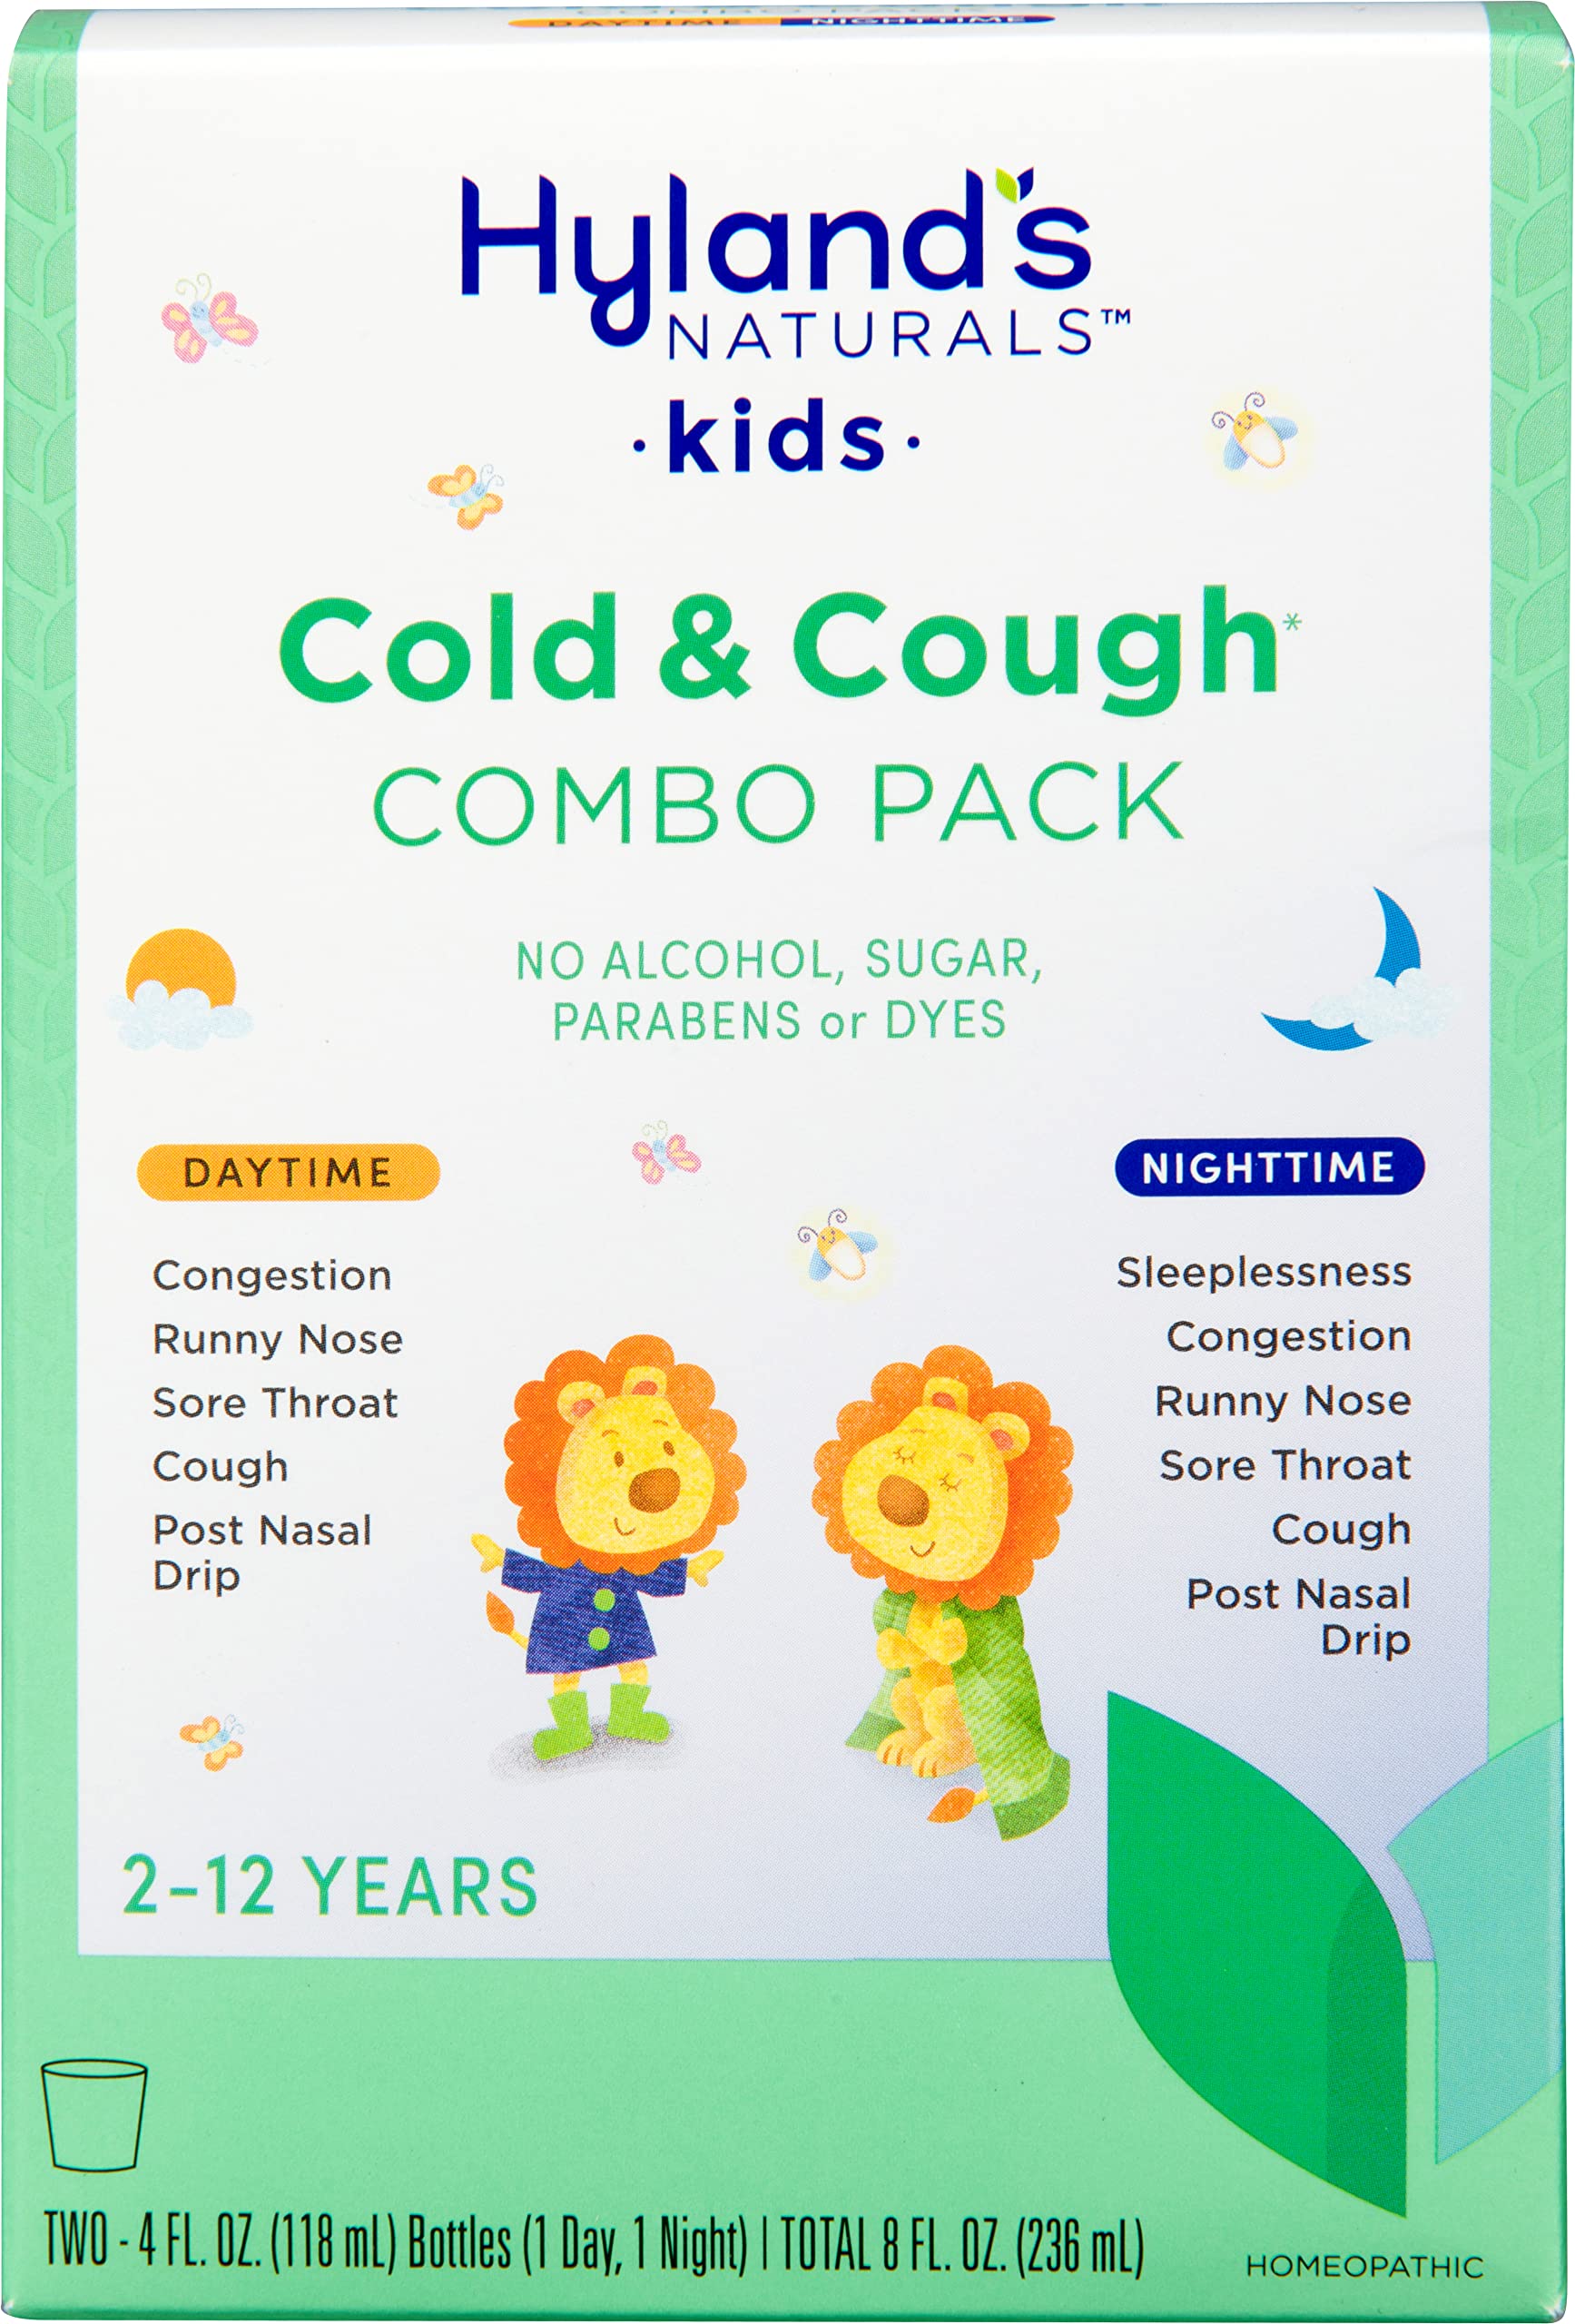 Hyland’s Naturals Kids Cold & Cough Medicine, Day and Night Combo Pack for Ages 2+ (4 Fl Oz - Pack of 2)$4.67 with s&s